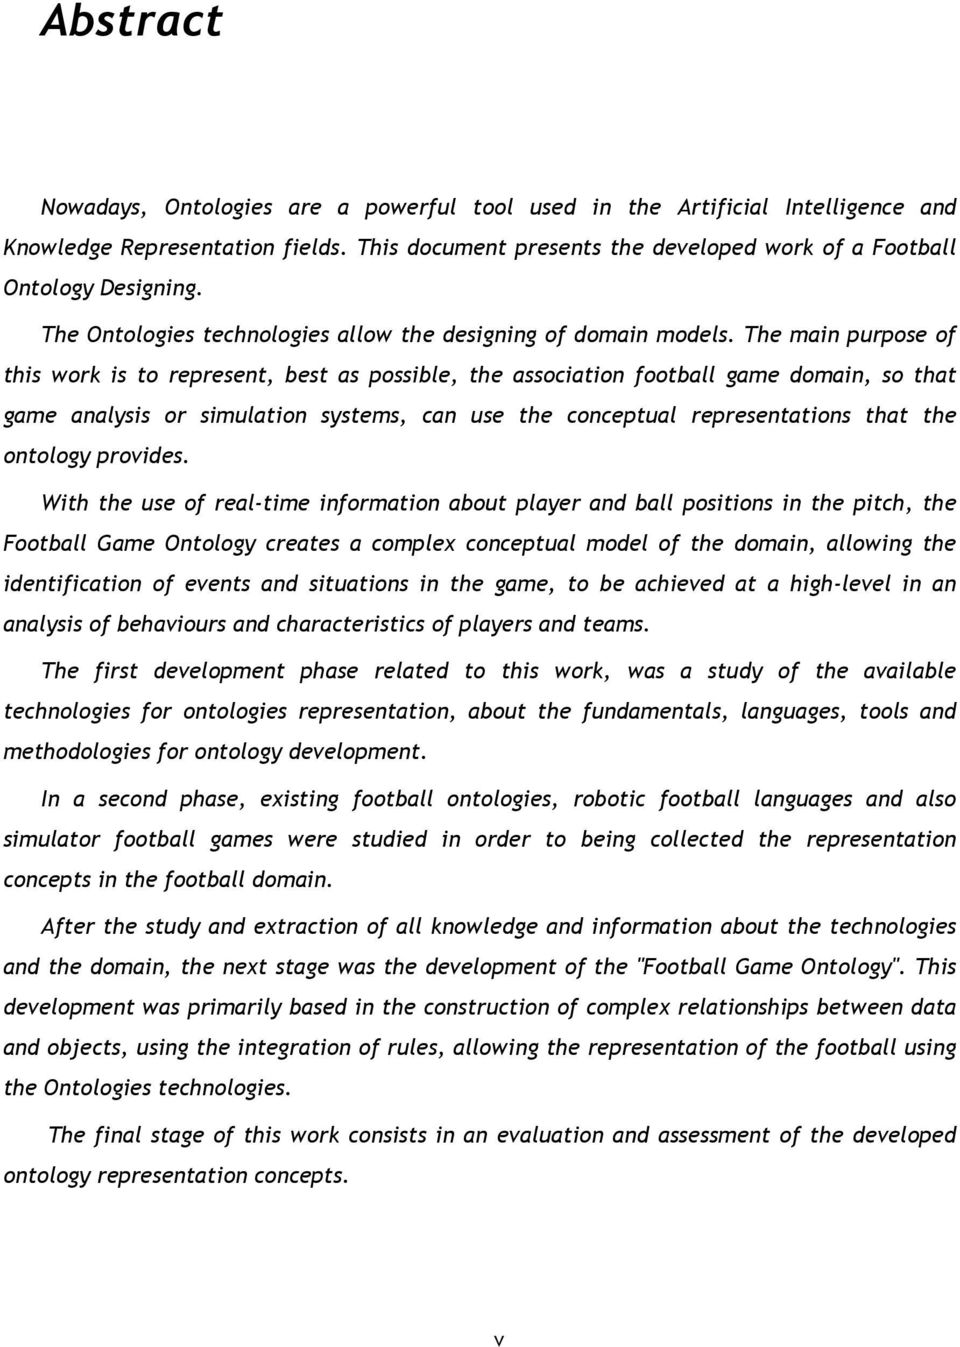 The main purpose of this work is to represent, best as possible, the association football game domain, so that game analysis or simulation systems, can use the conceptual representations that the